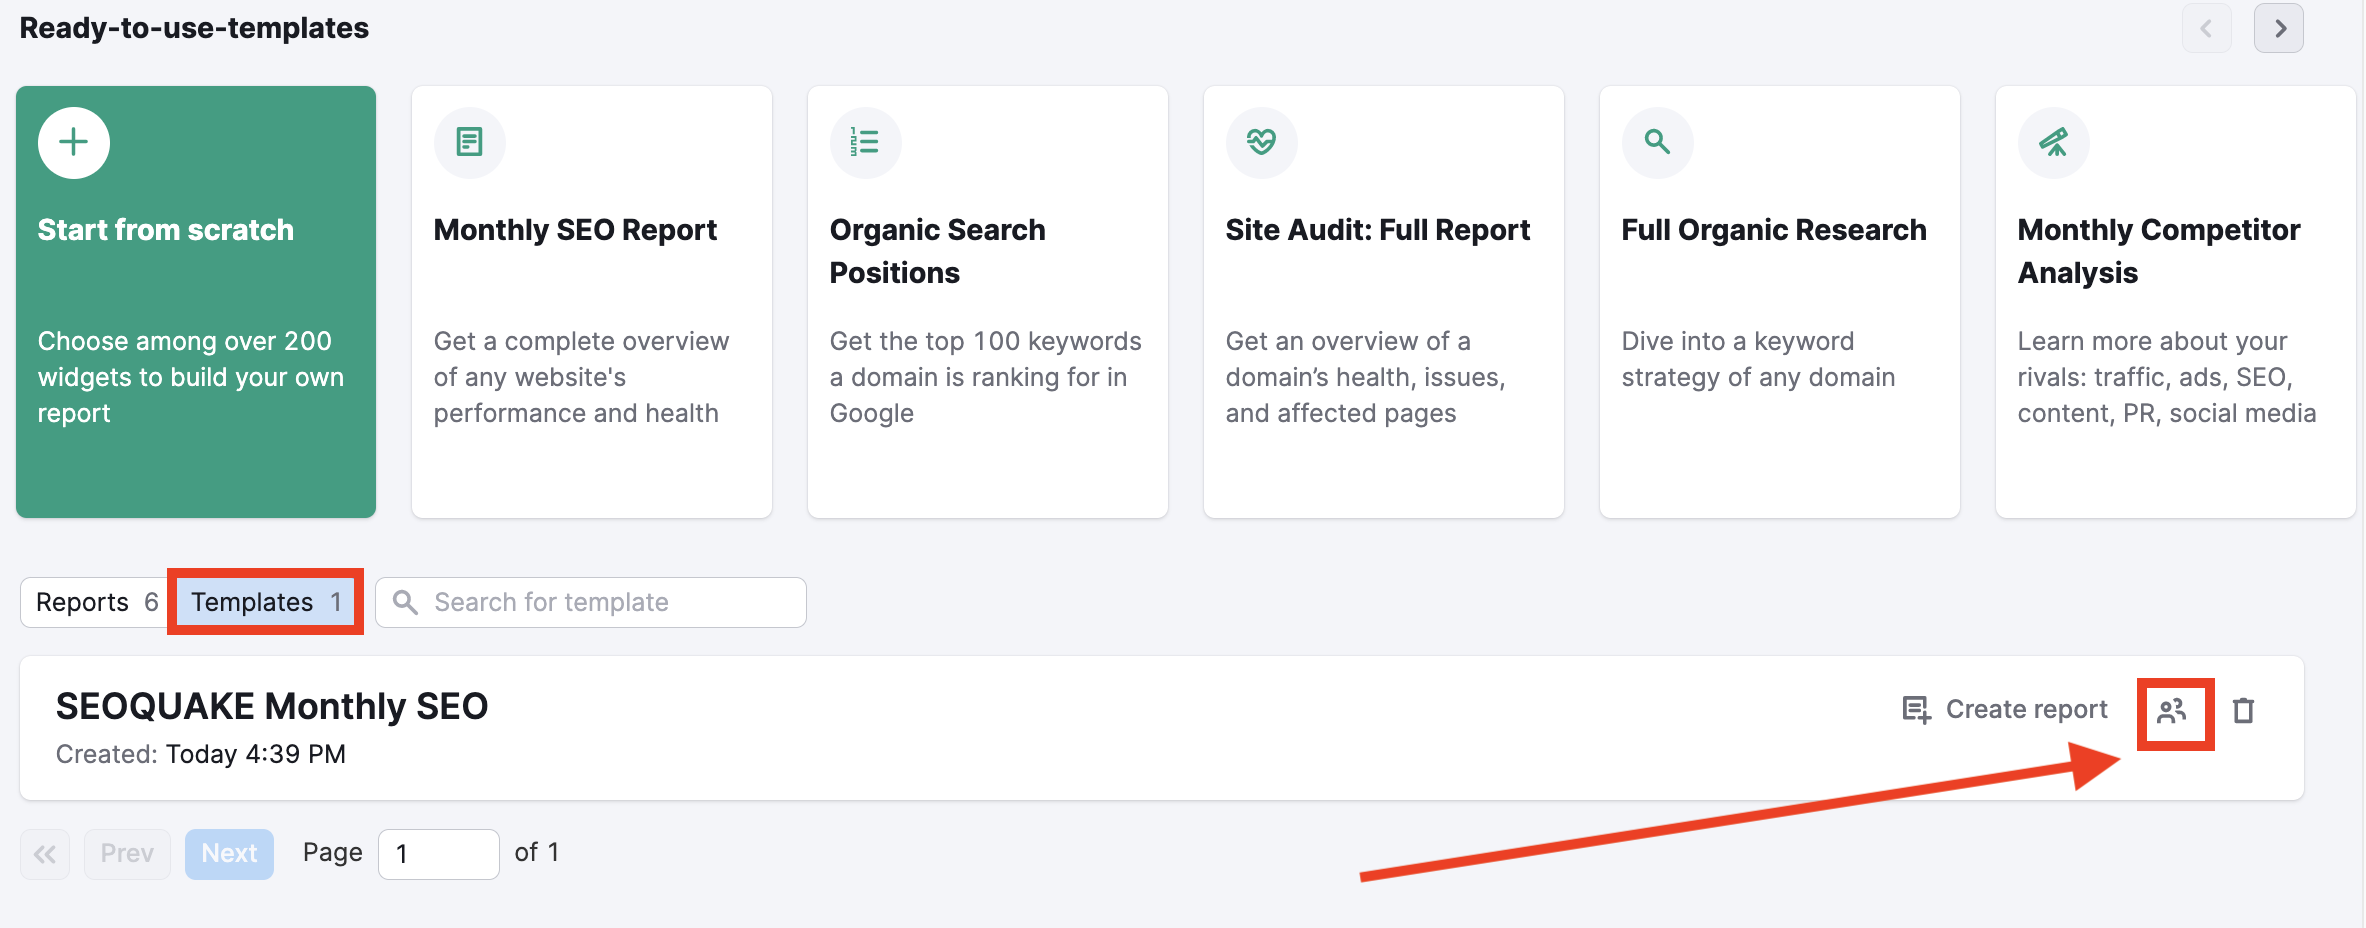 How to Keep Your Semrush Team on the Same Page image 8